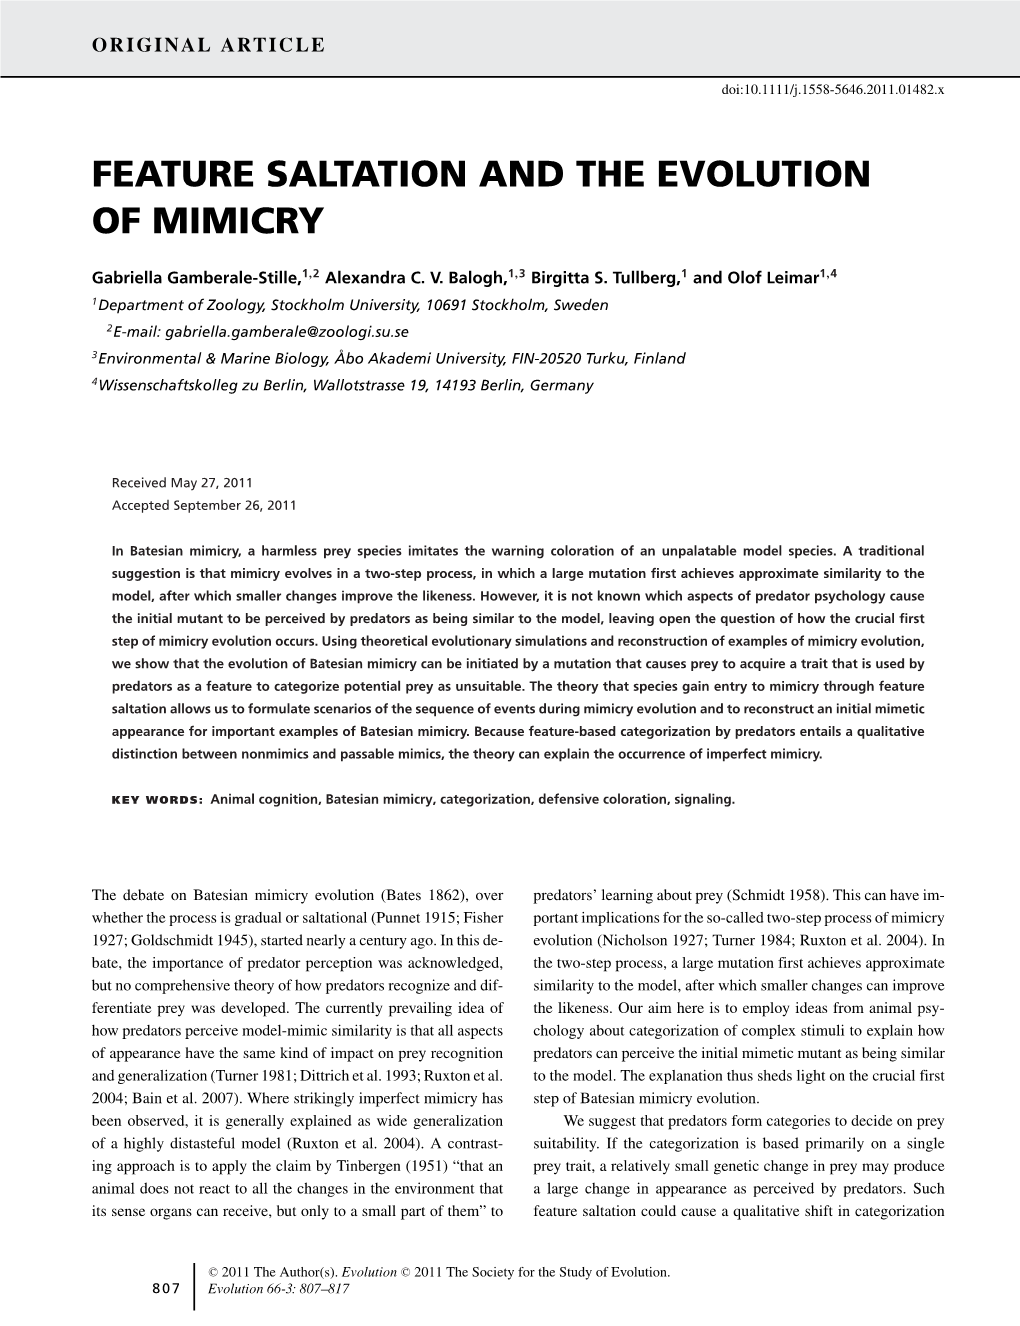 Feature Saltation and the Evolution of Mimicry